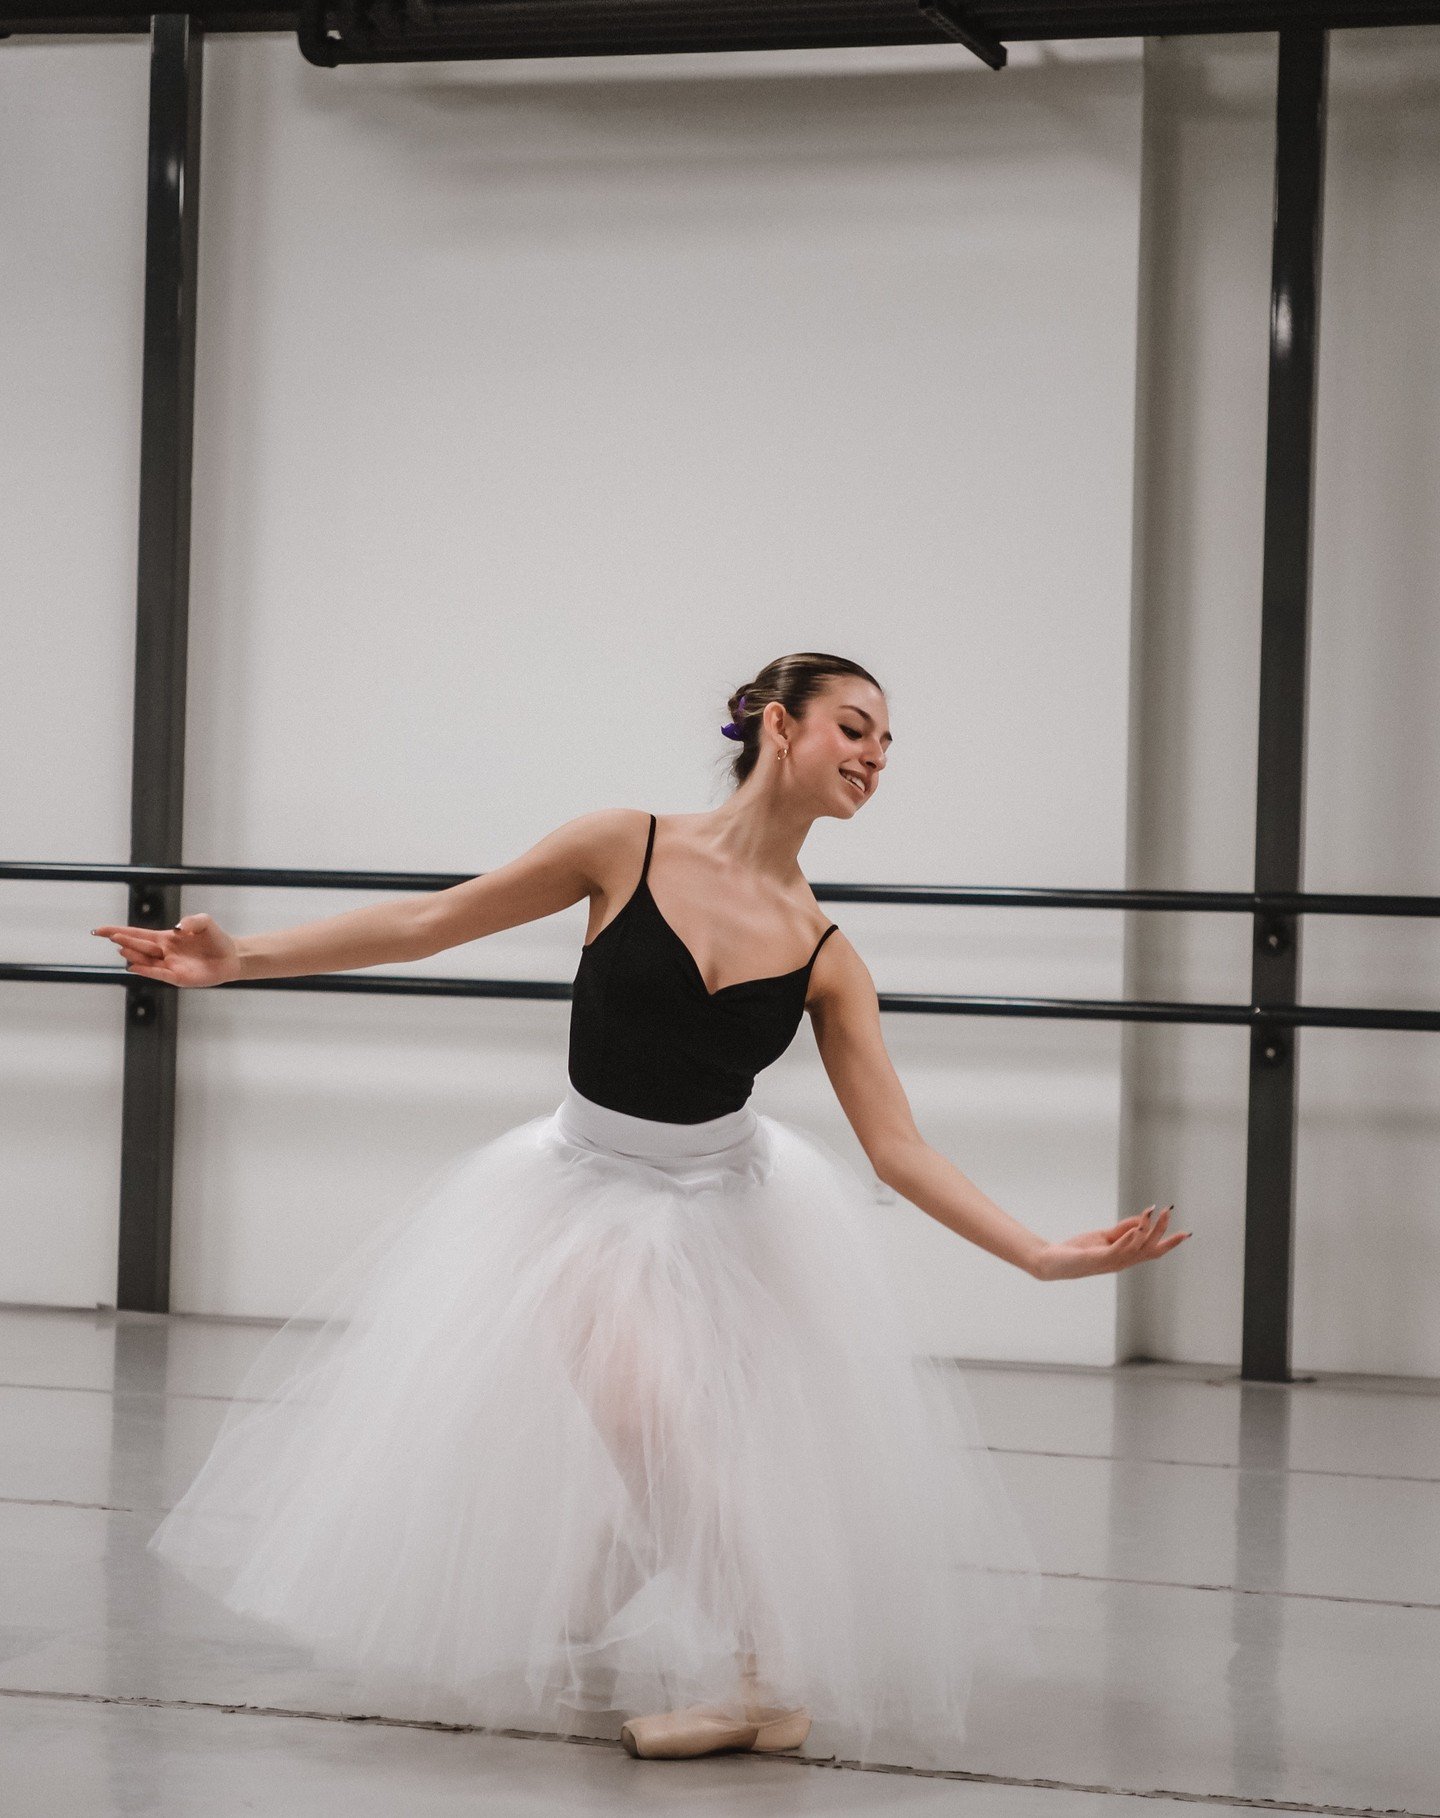 Step into a world of enchantment as our schools bring the timeless classic, Coppelia, to life on June 9th. Join us for a mesmerizing evening filled with magic and artistry. Reserve your tickets now through the link in our bio! @edgewaterperformingart